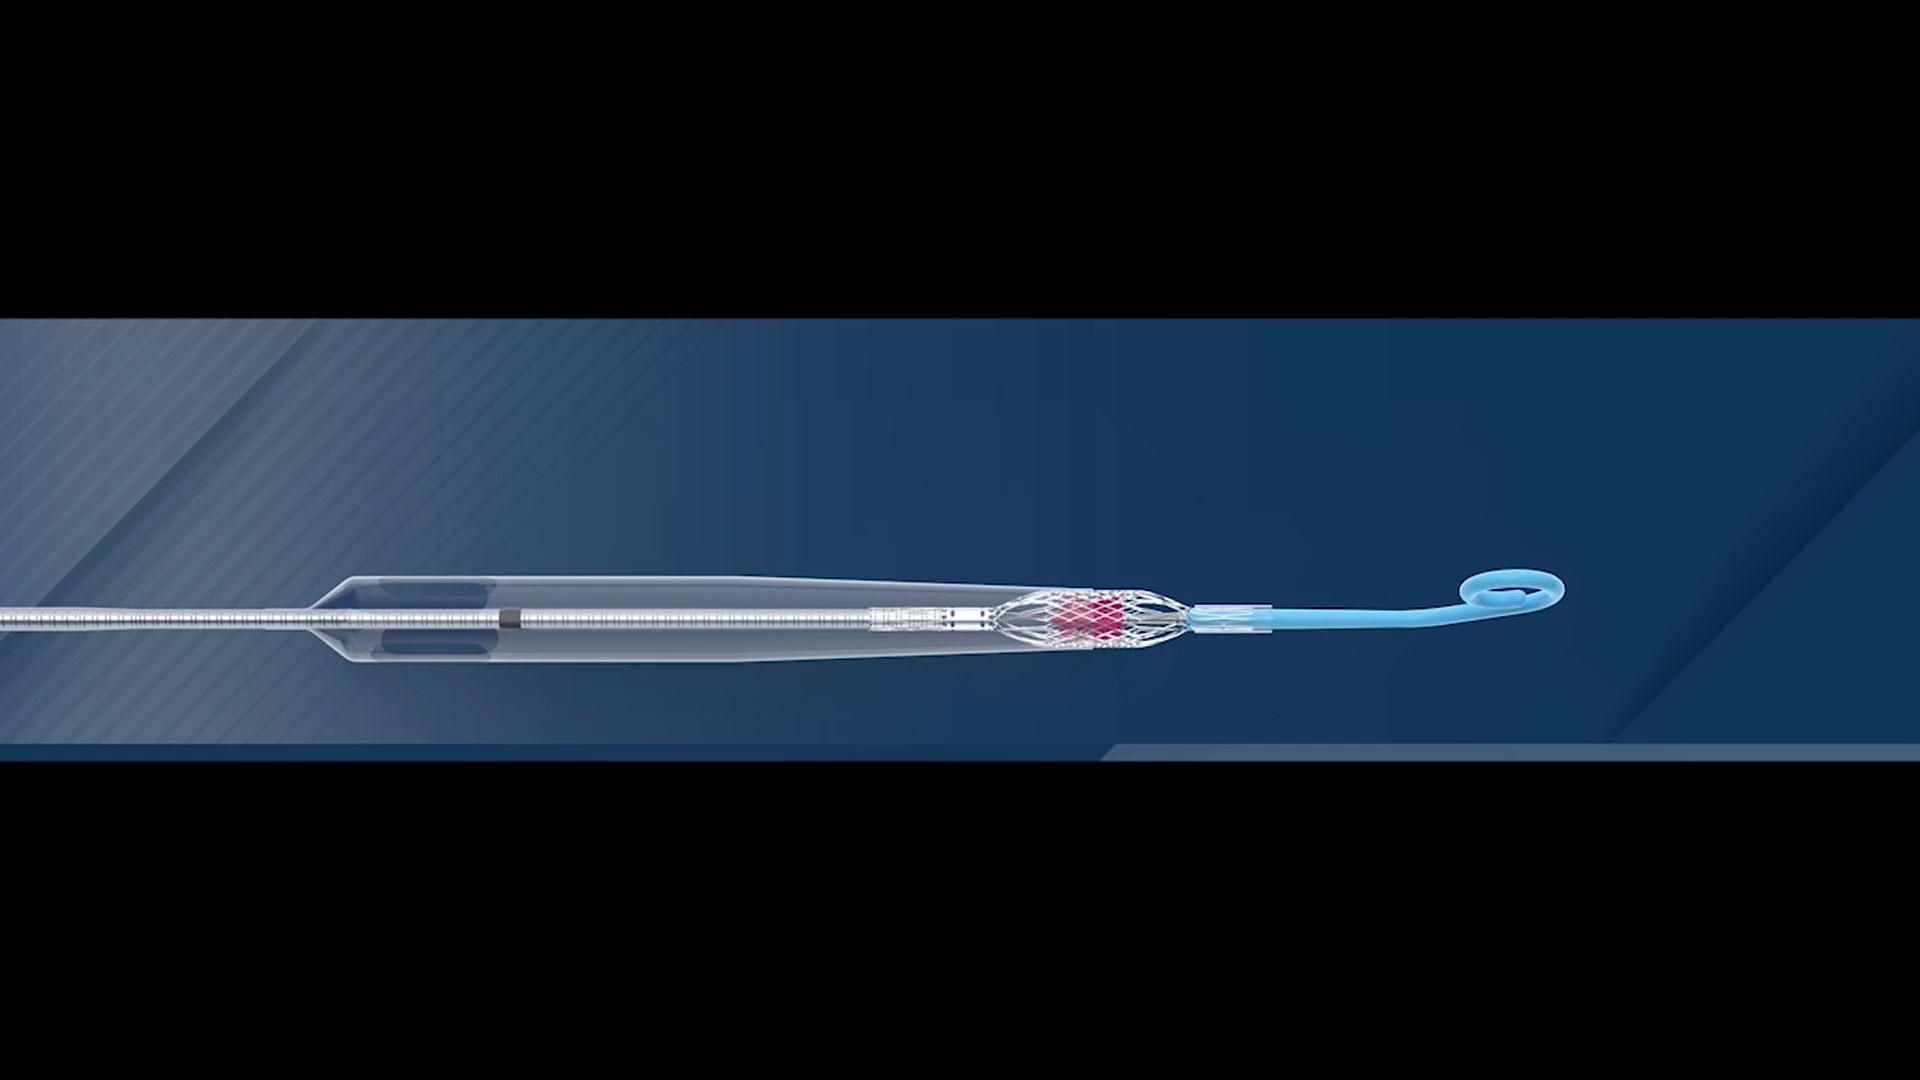 Impella ECP is the world’s smallest heart pump and the only heart pump compatible with small bore access and closure techniques.